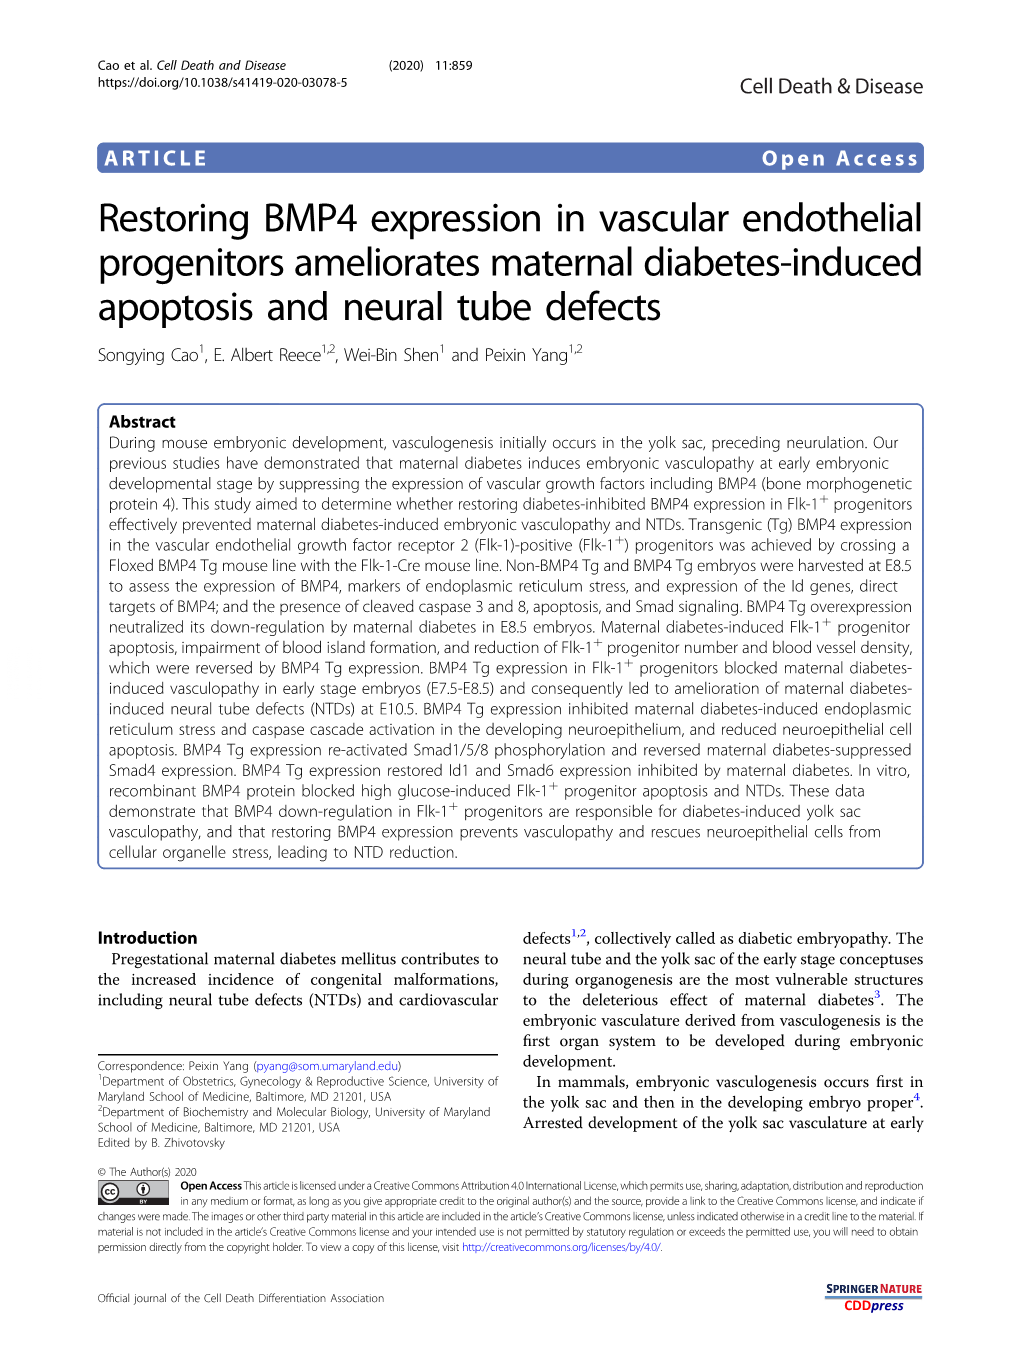 Restoring BMP4 Expression in Vascular Endothelial Progenitors Ameliorates Maternal Diabetes-Induced Apoptosis and Neural Tube De